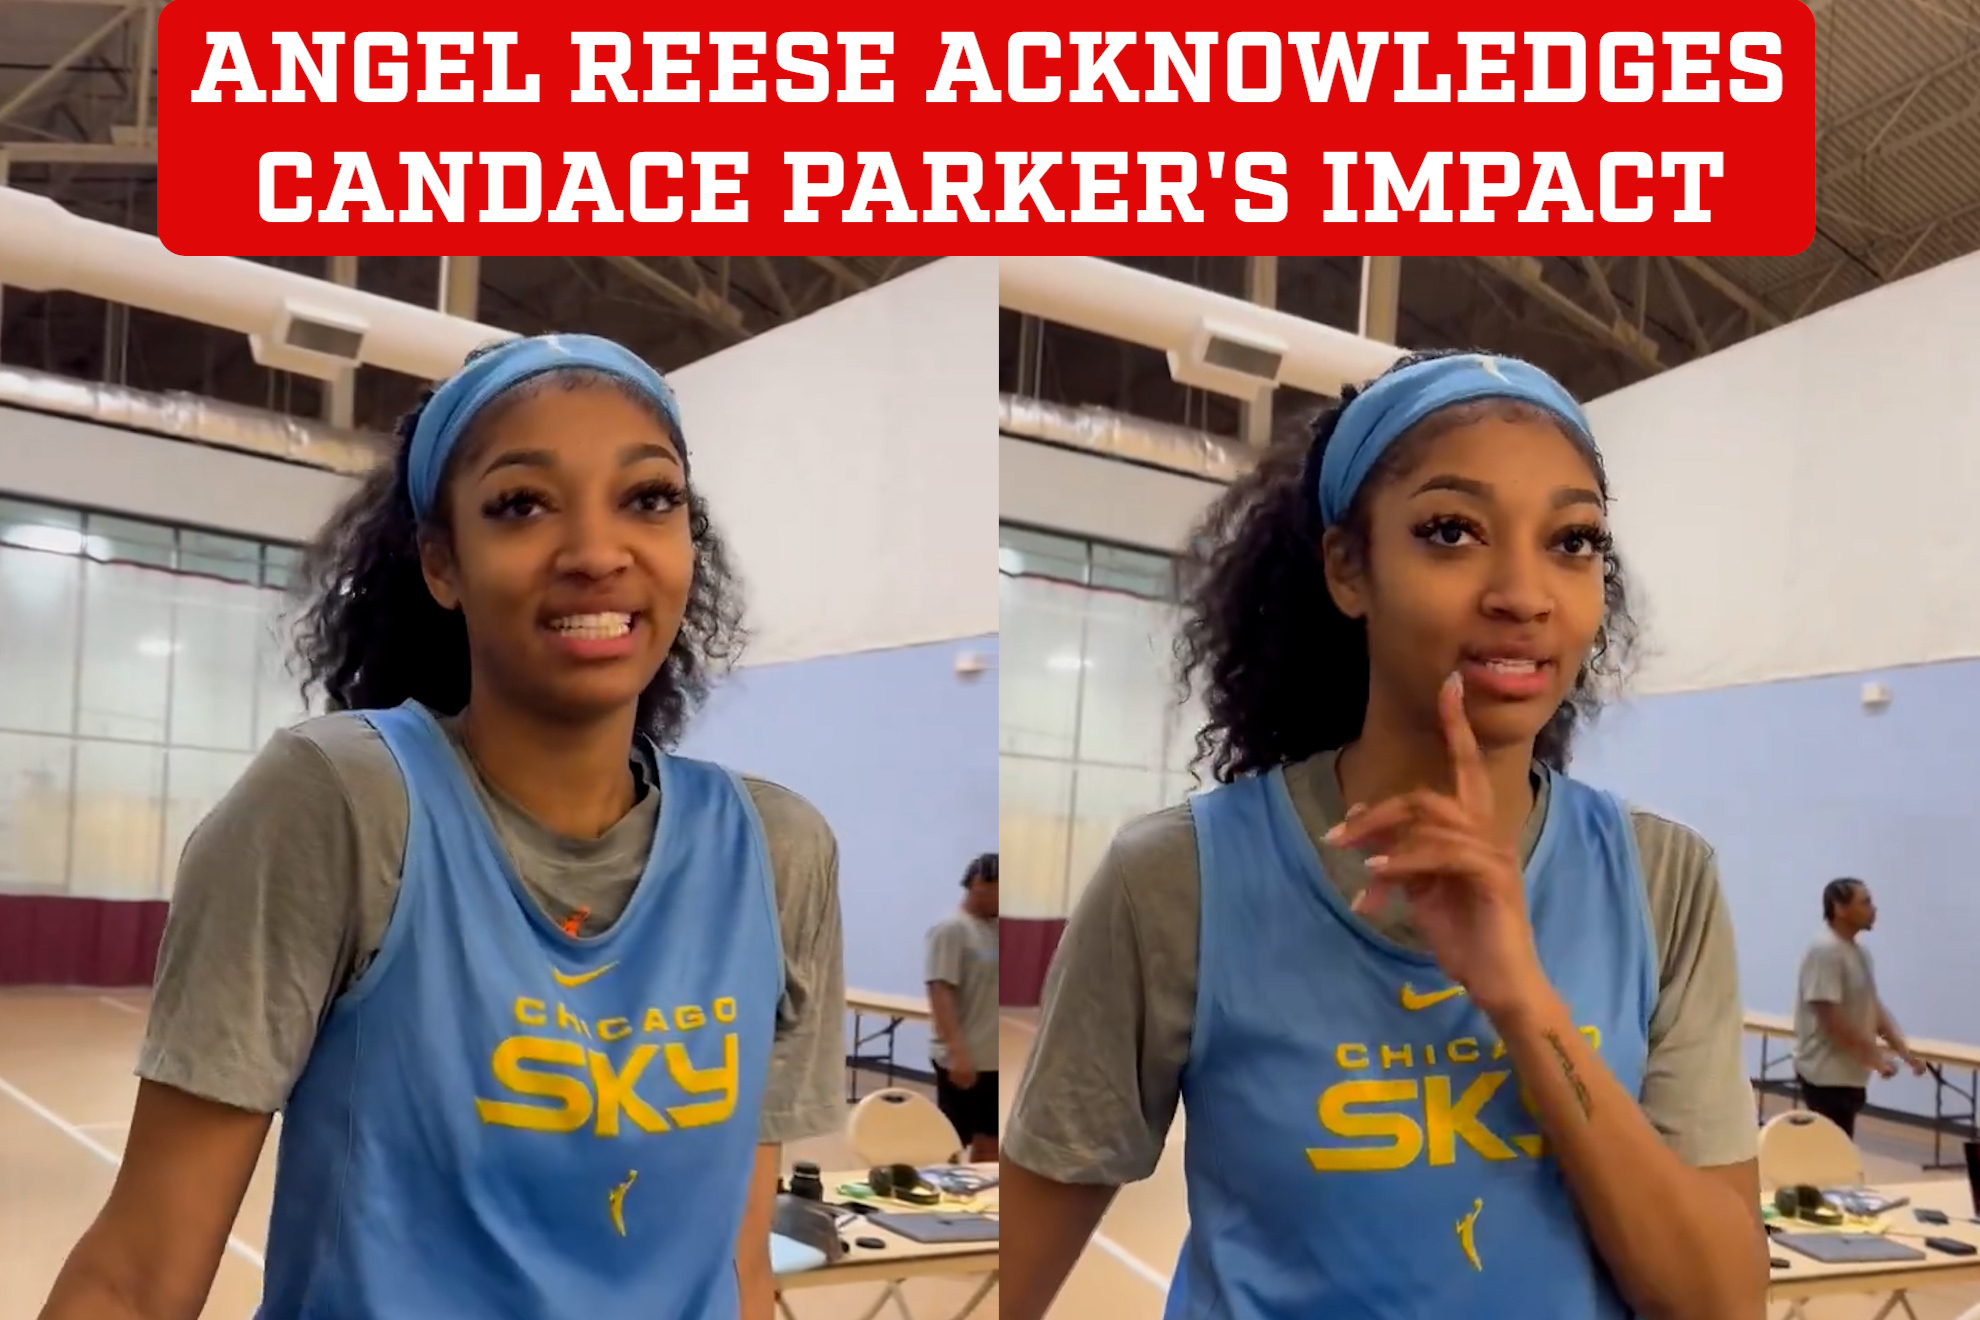 Angel Reese recognizes the inspiring influence of Candace Parker